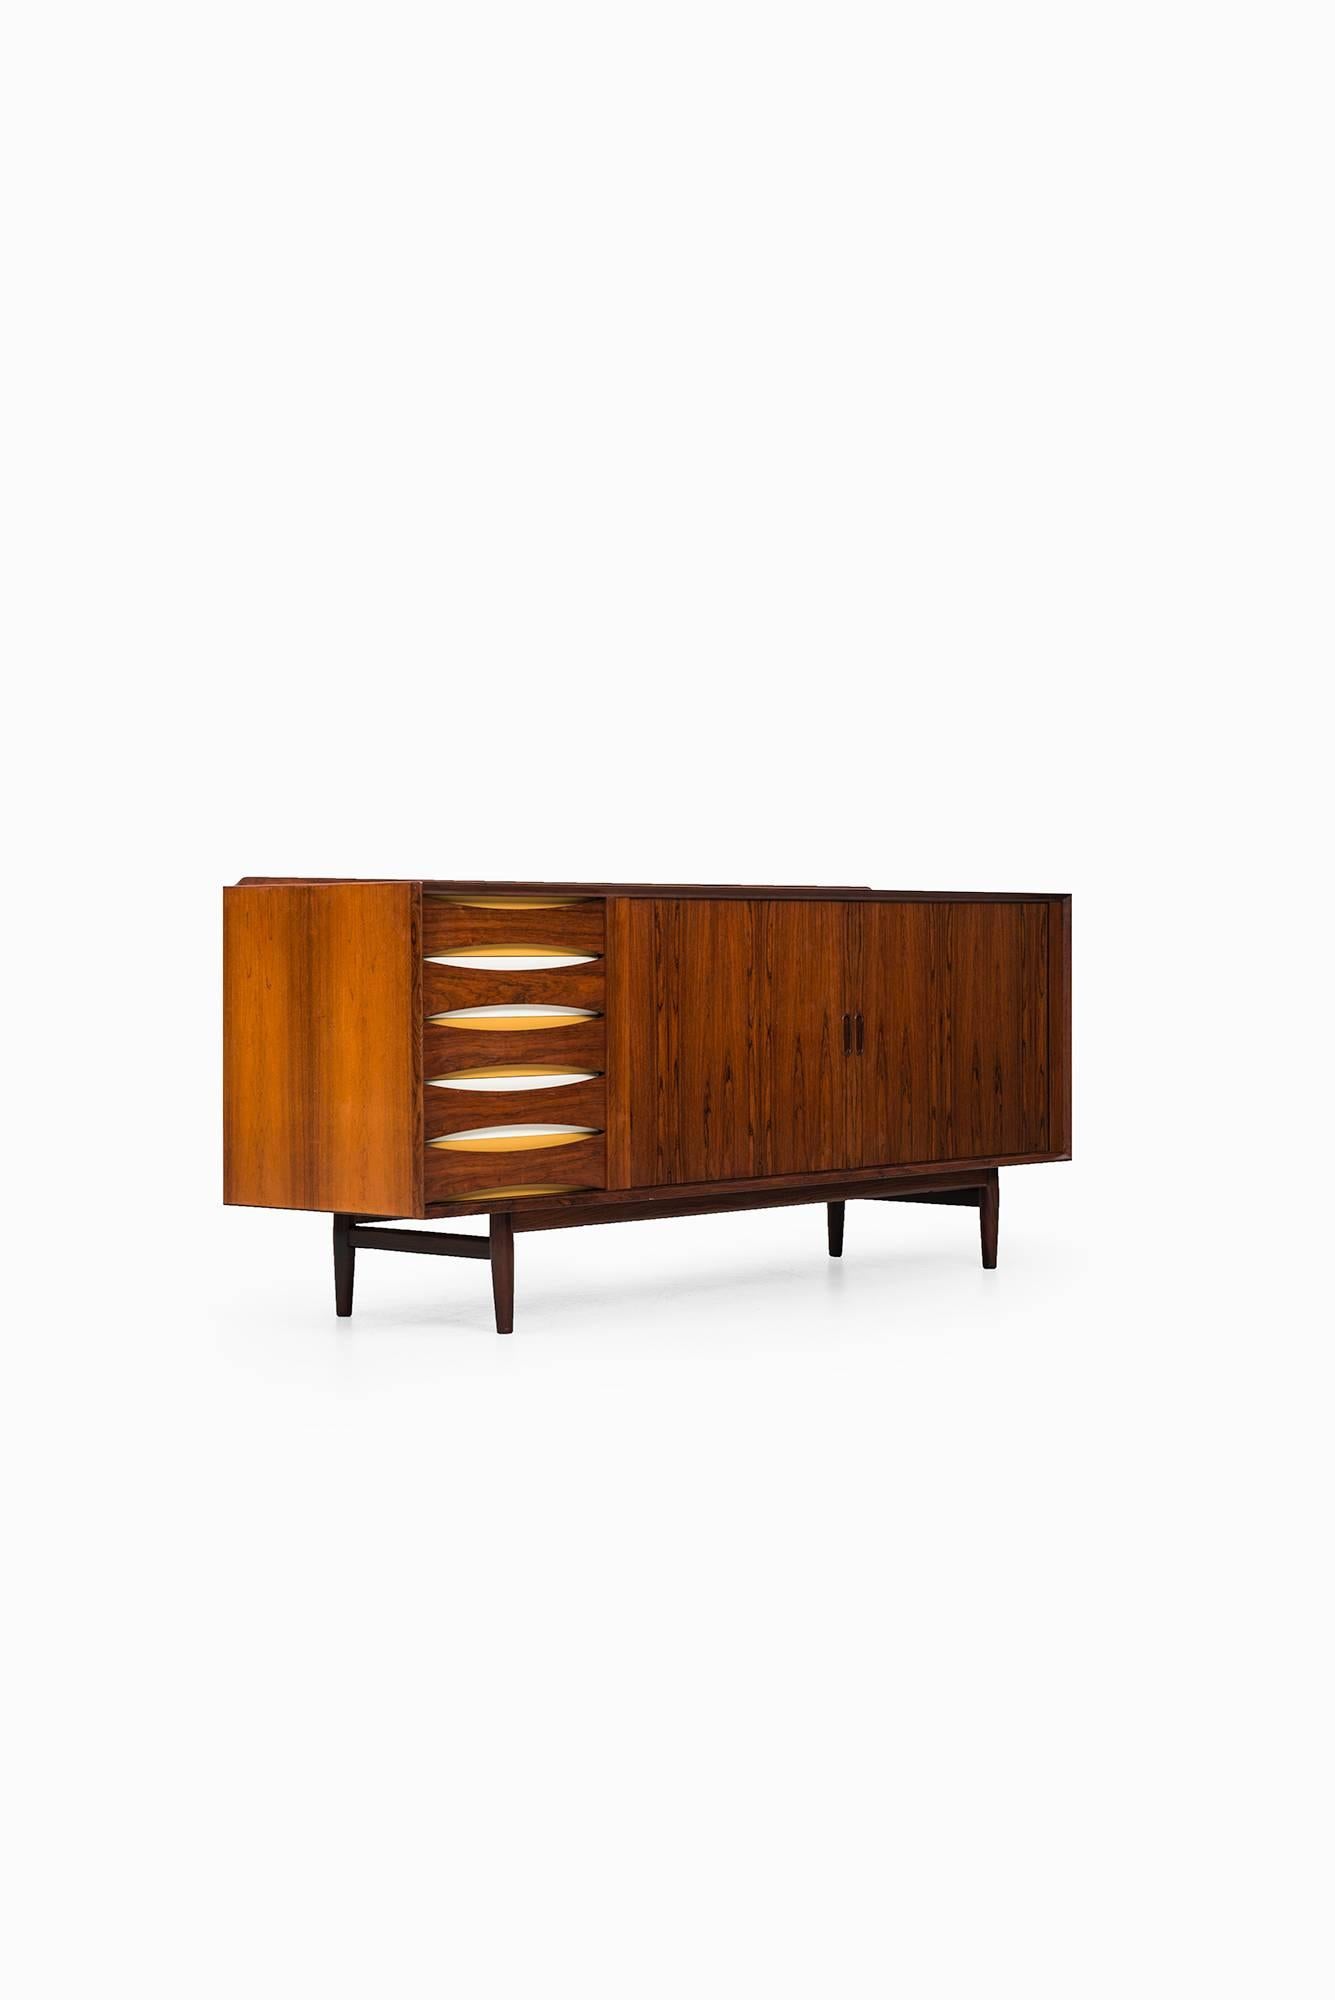 Rare sideboard OS29 with tambour doors designed by Arne Vodder. Produced by Sibast møbelfabrik in Denmark.